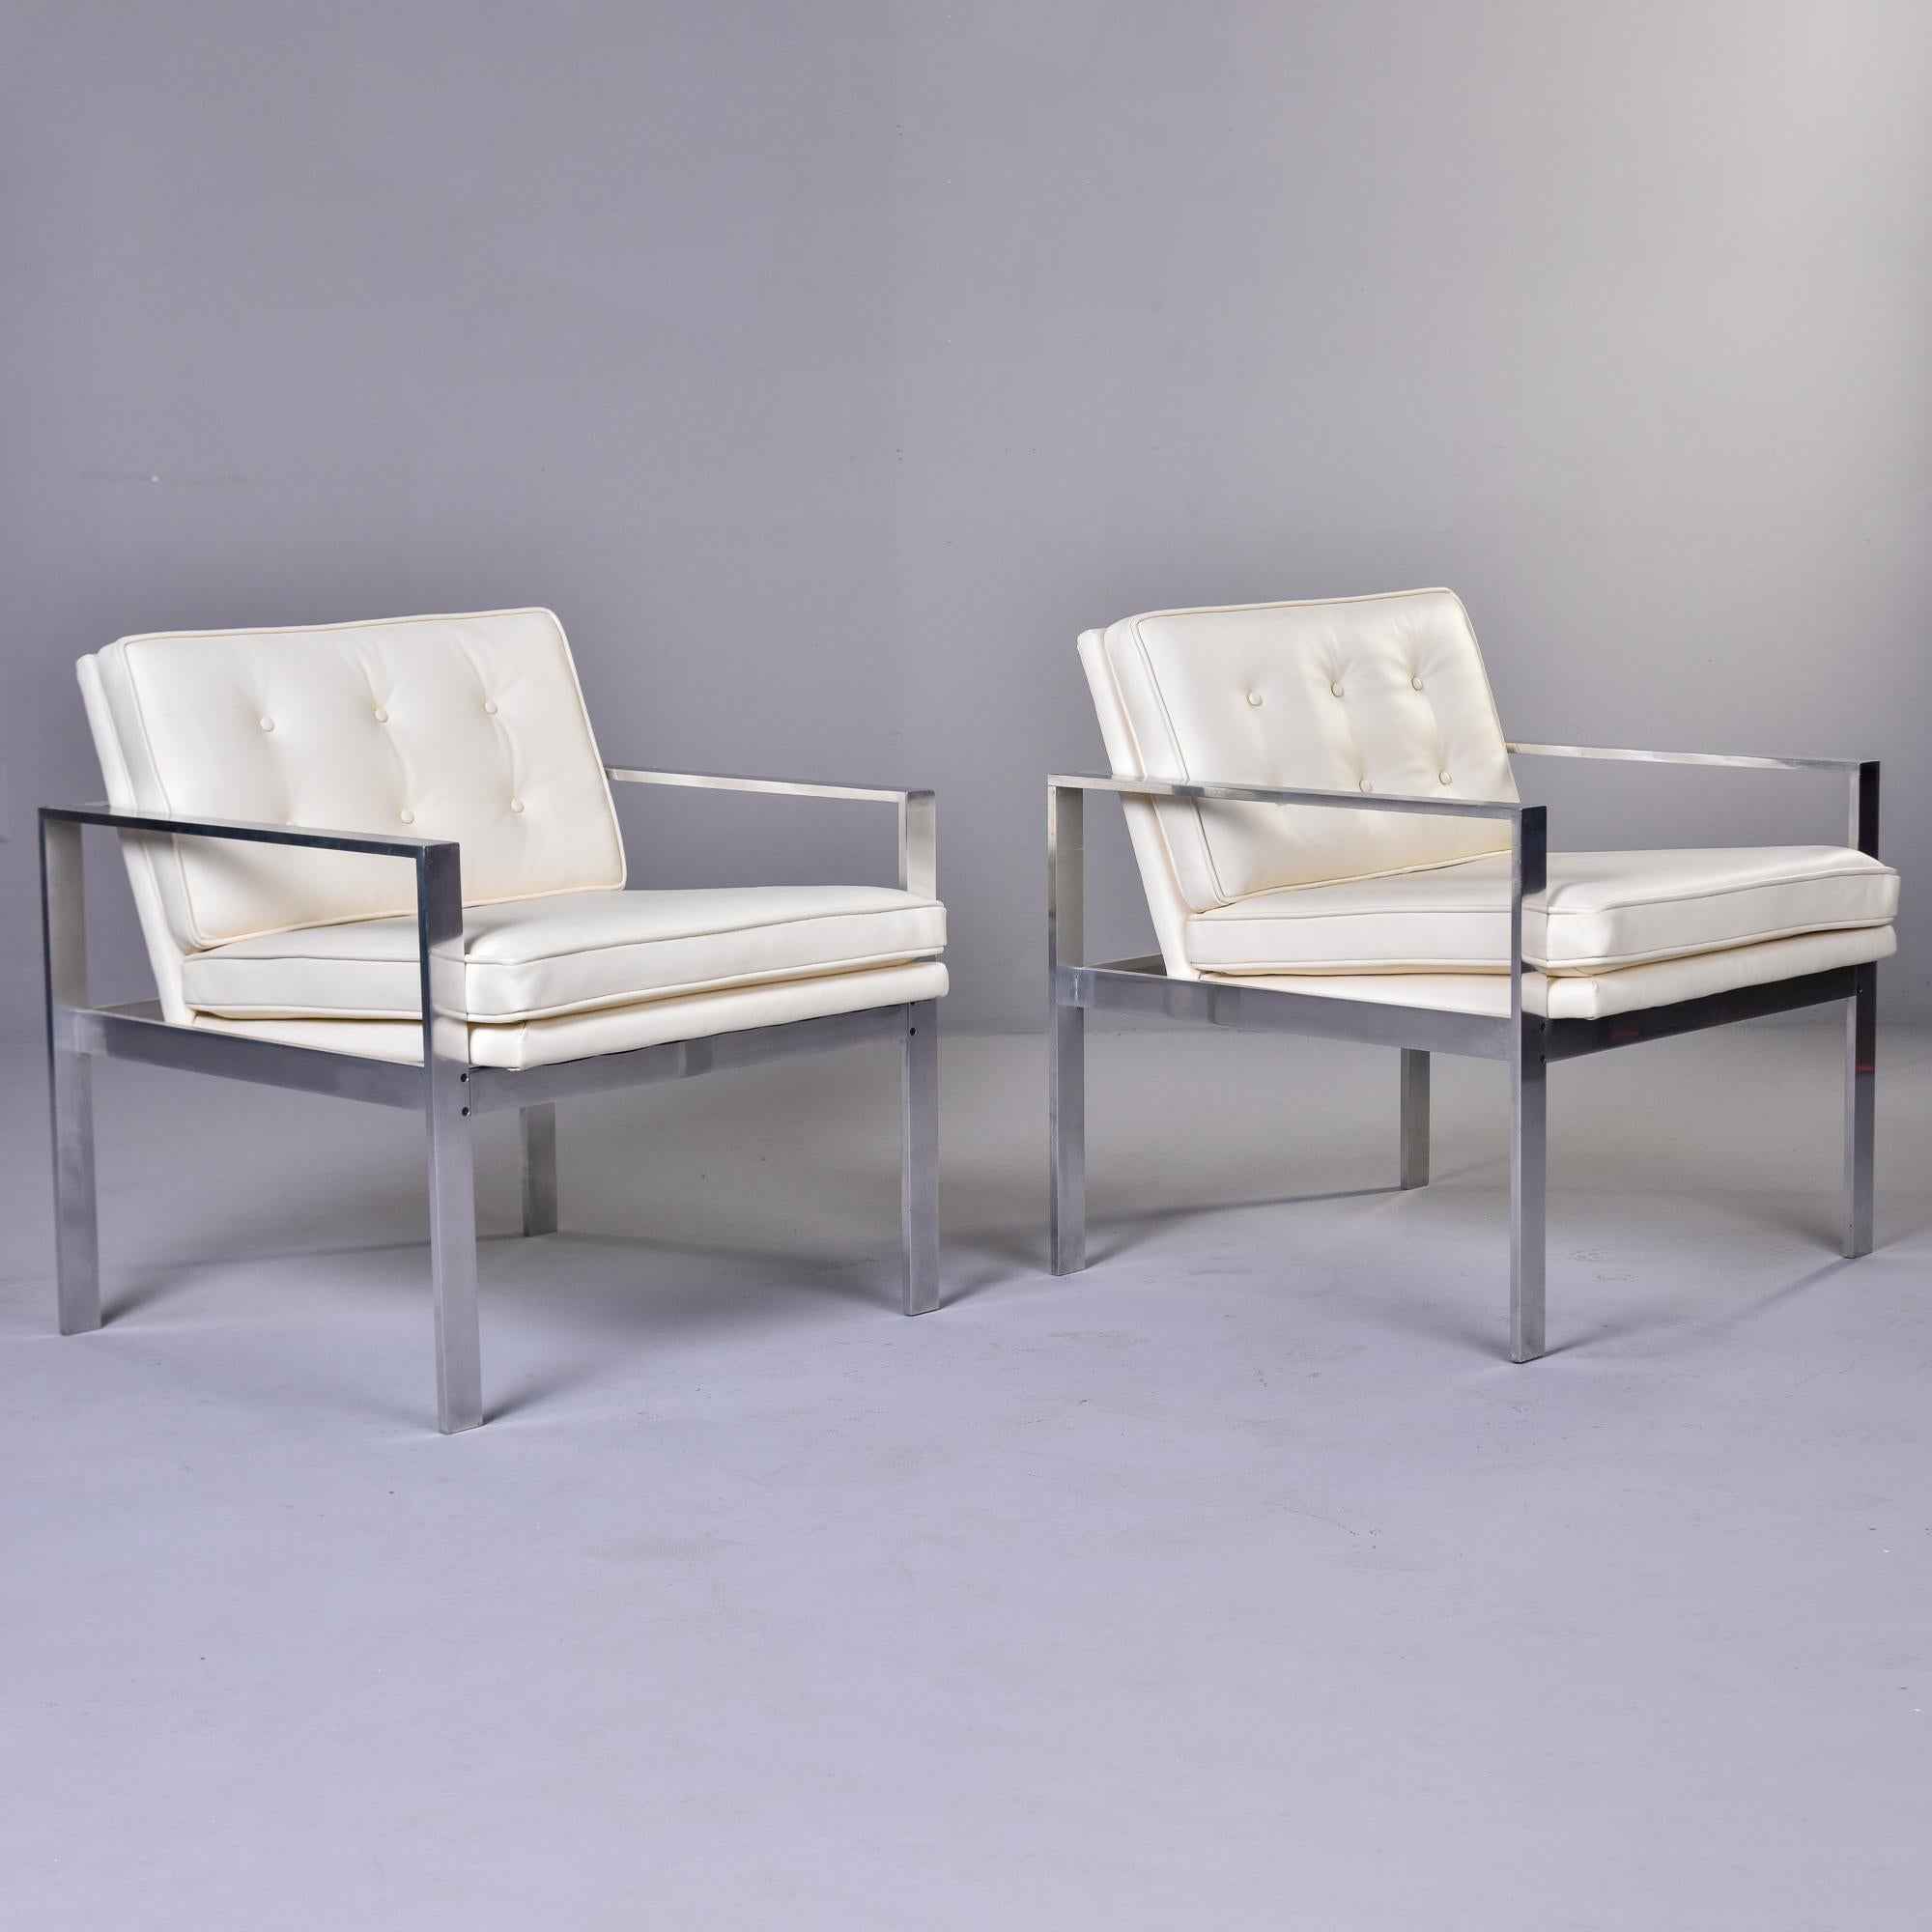 Found in the US, this pair of mid century aluminum frame chairs date from the late 1960s and are attributed to Harvey Probber. Newly upholstered in a creamy, off-white leather with flat bar style frames and a squared shape. Seat backs have button